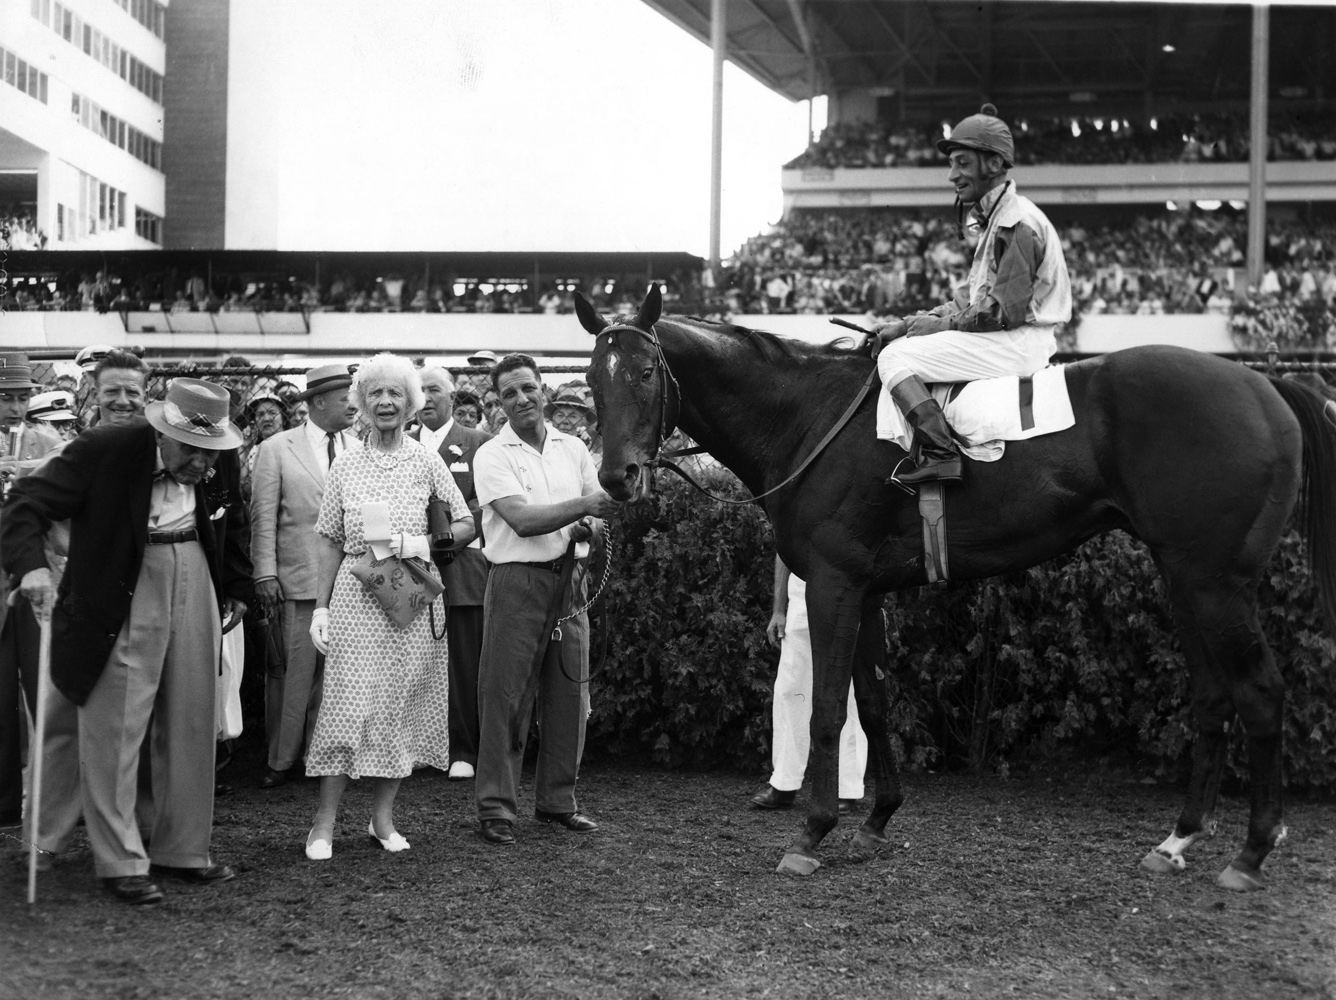 Bold Ruler (Eddie Arcaro up) in the winner's circle for the 1958 Monmouth Handicap at Monmouth Park, his final career win (Turfotos/Museum Collection)